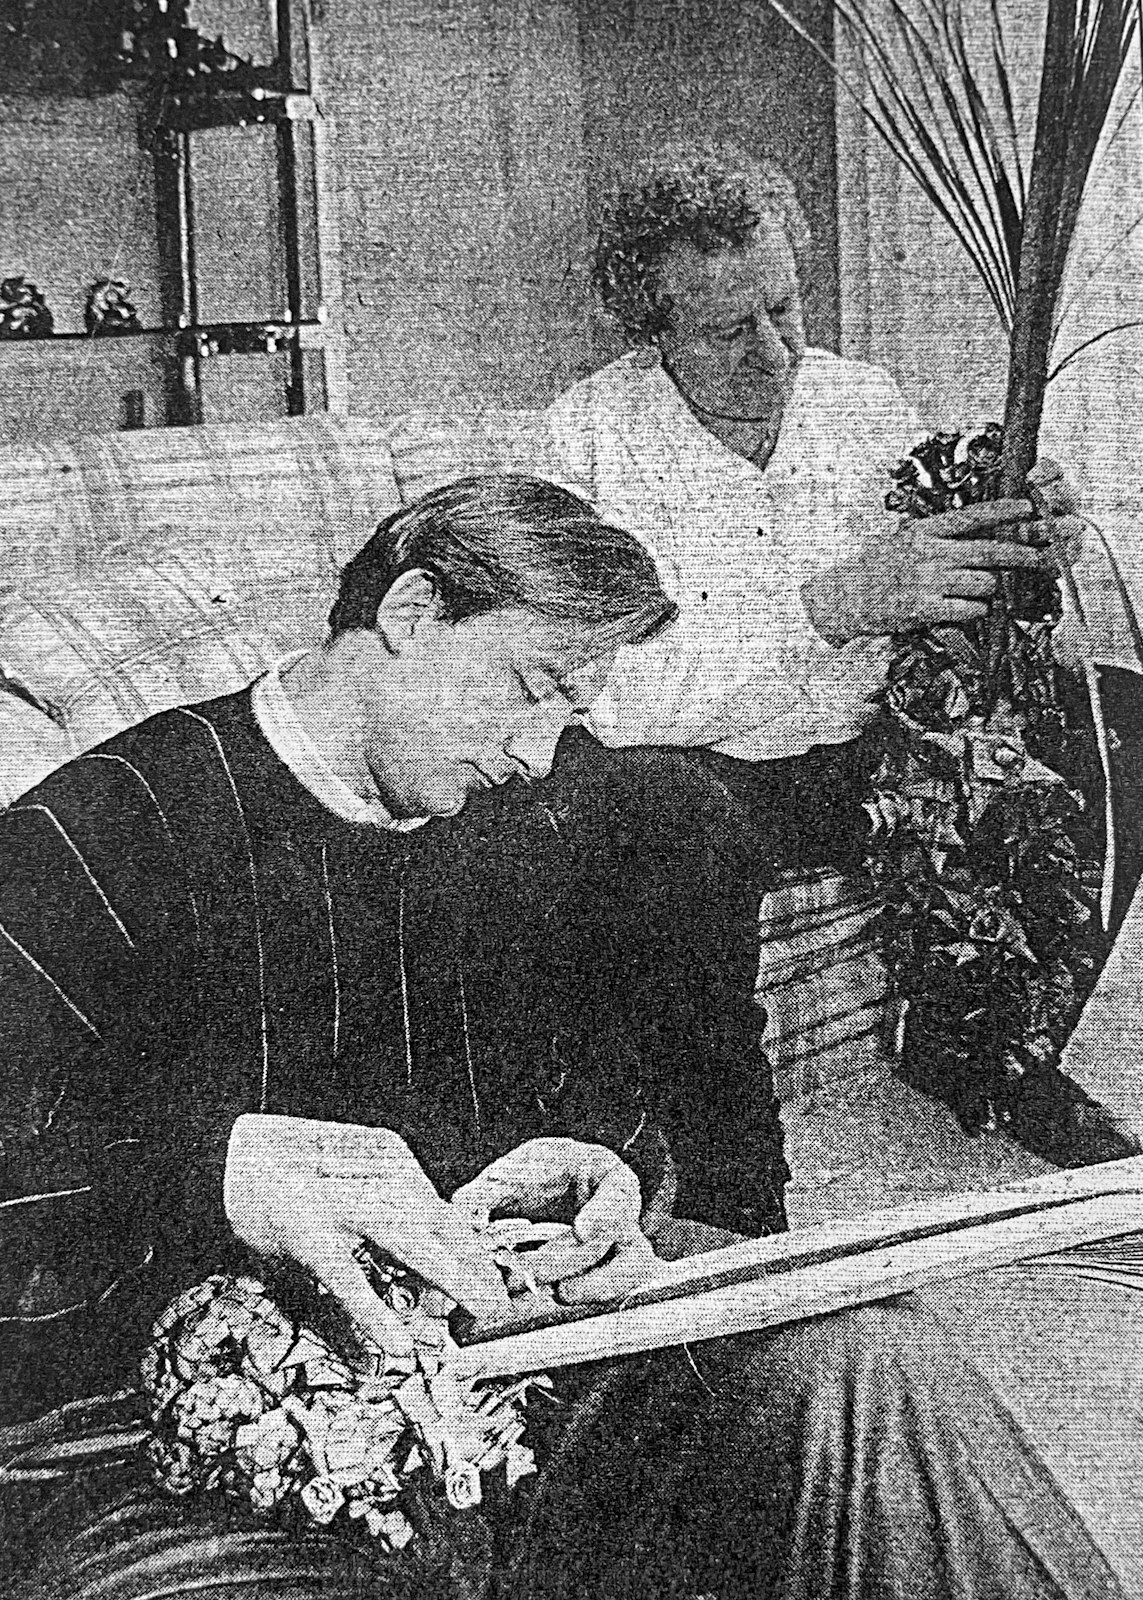 Frederick “Fritz” Wenson, right, and his son Tony Wenson are pictured braiding palms in a photo from a 1991 Detroit News article.